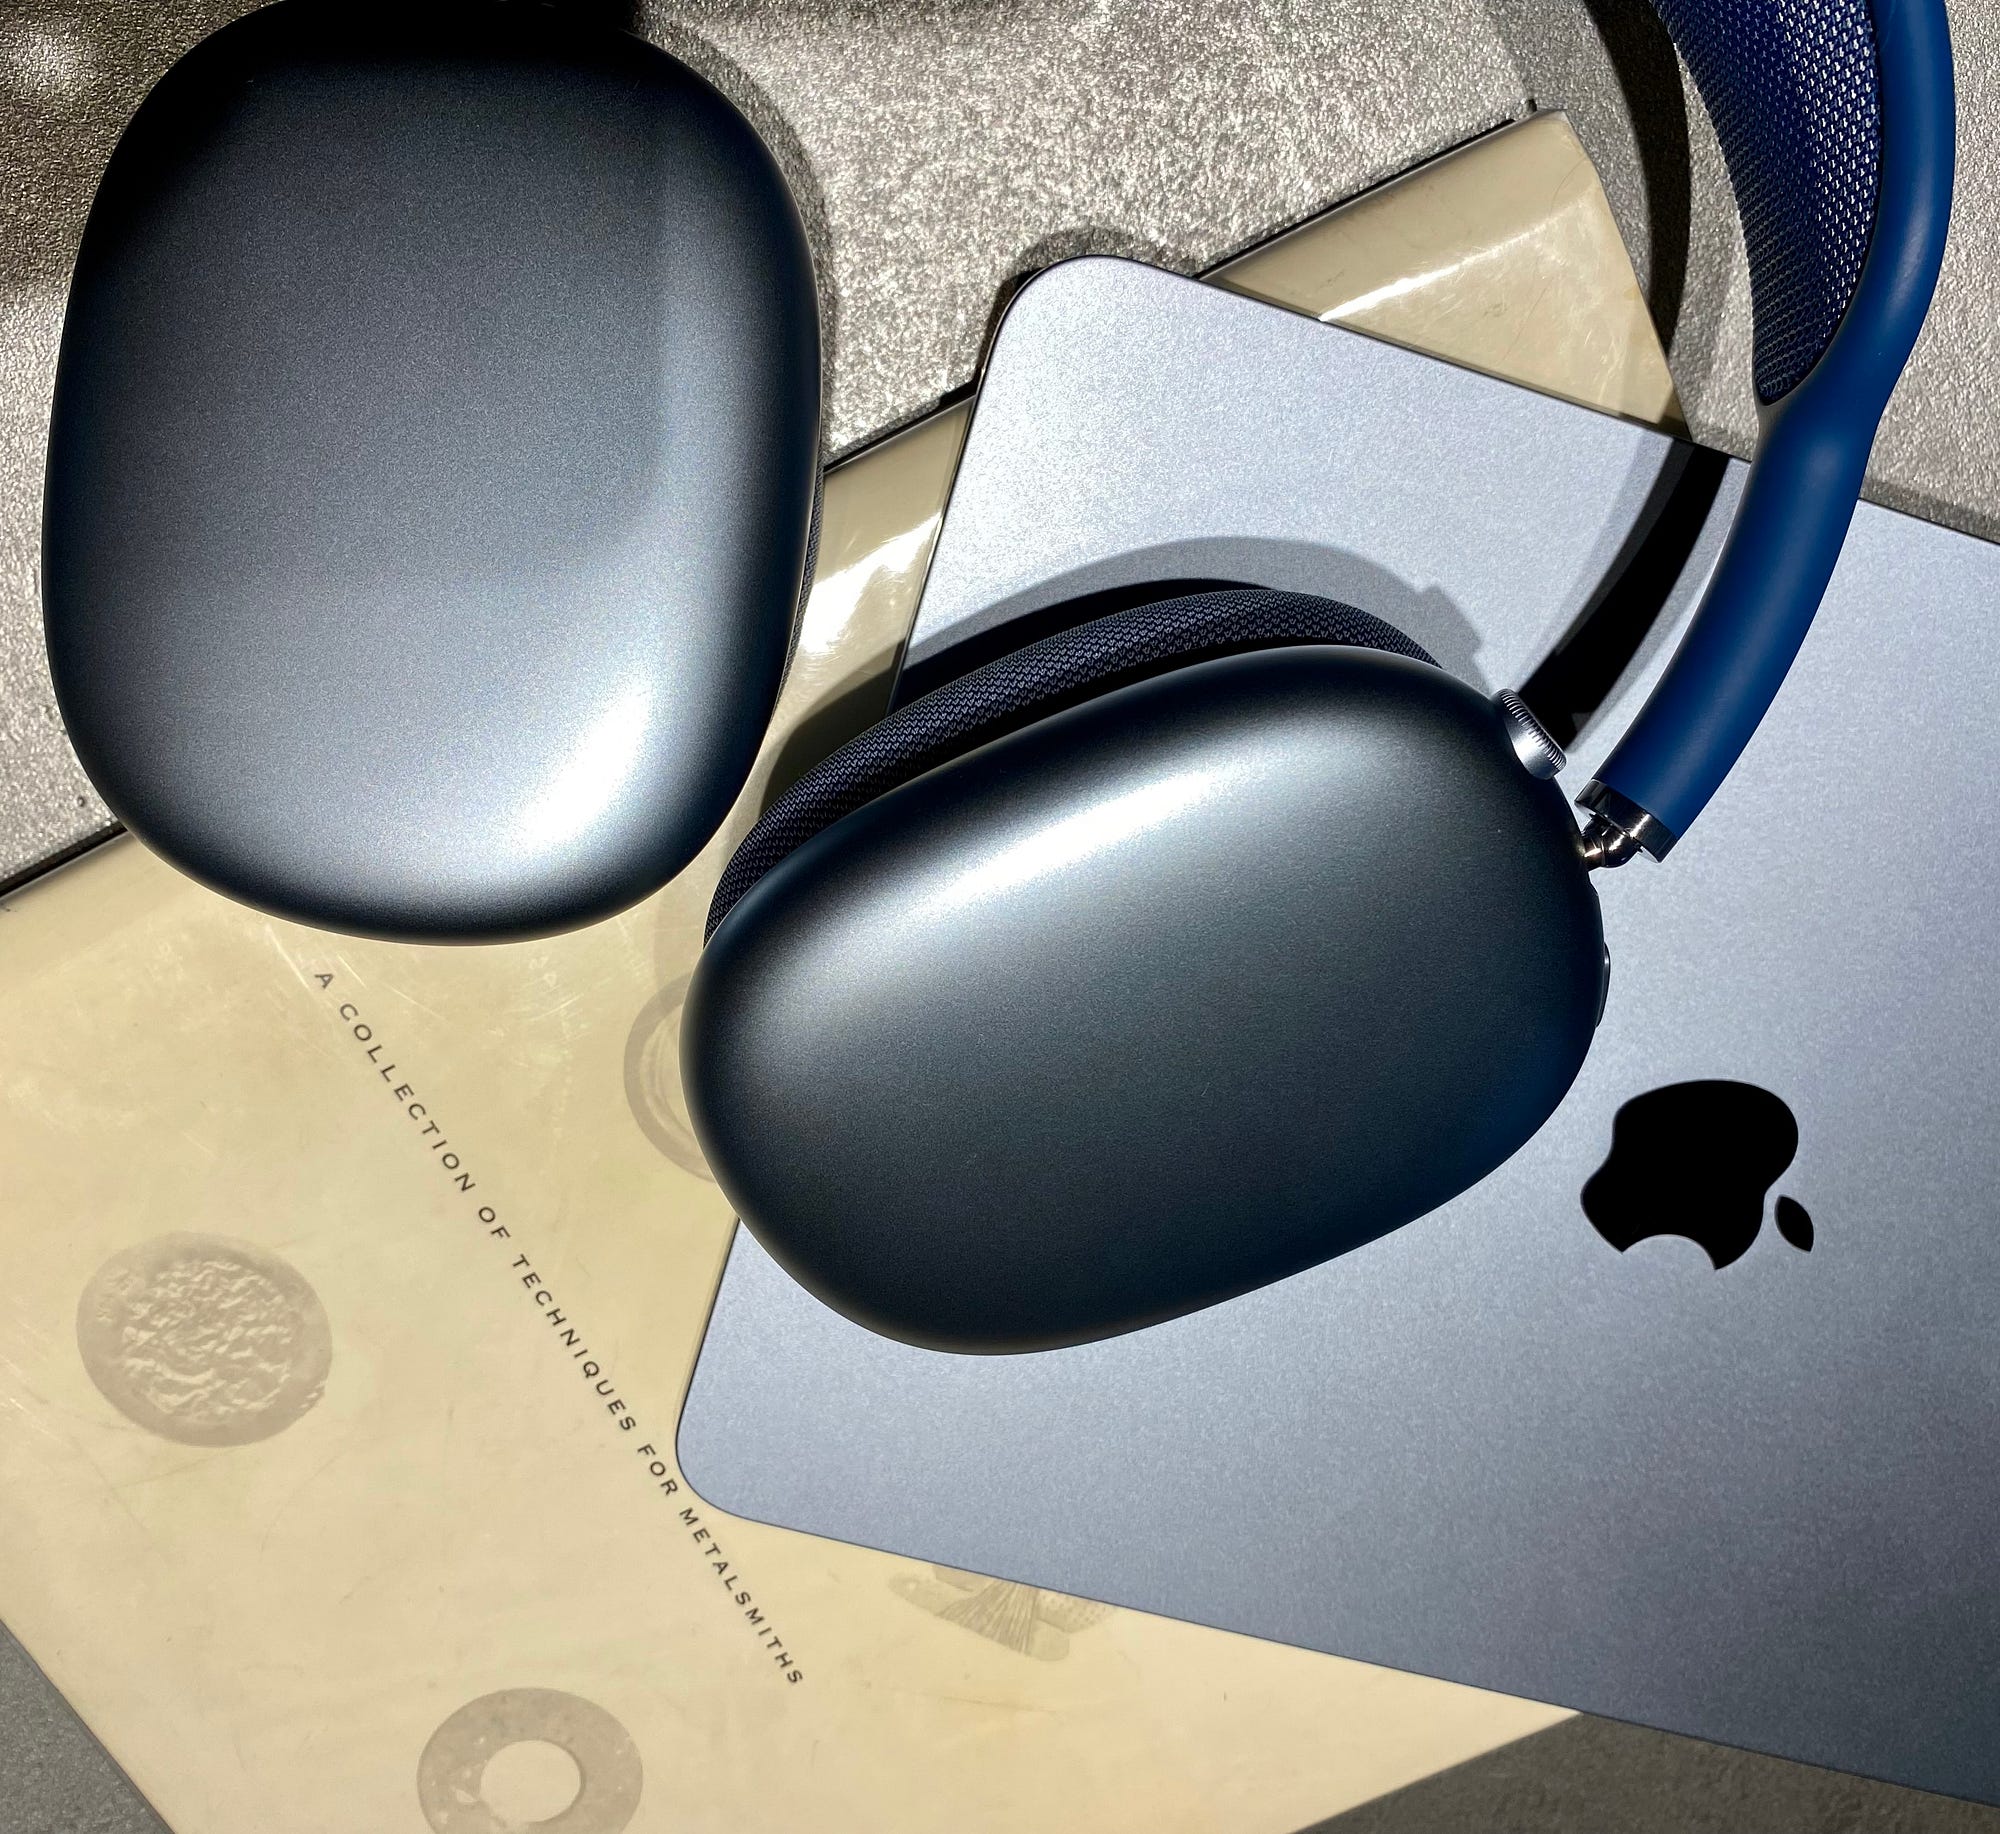 Apple AirPods Max Review - What Do We Think?